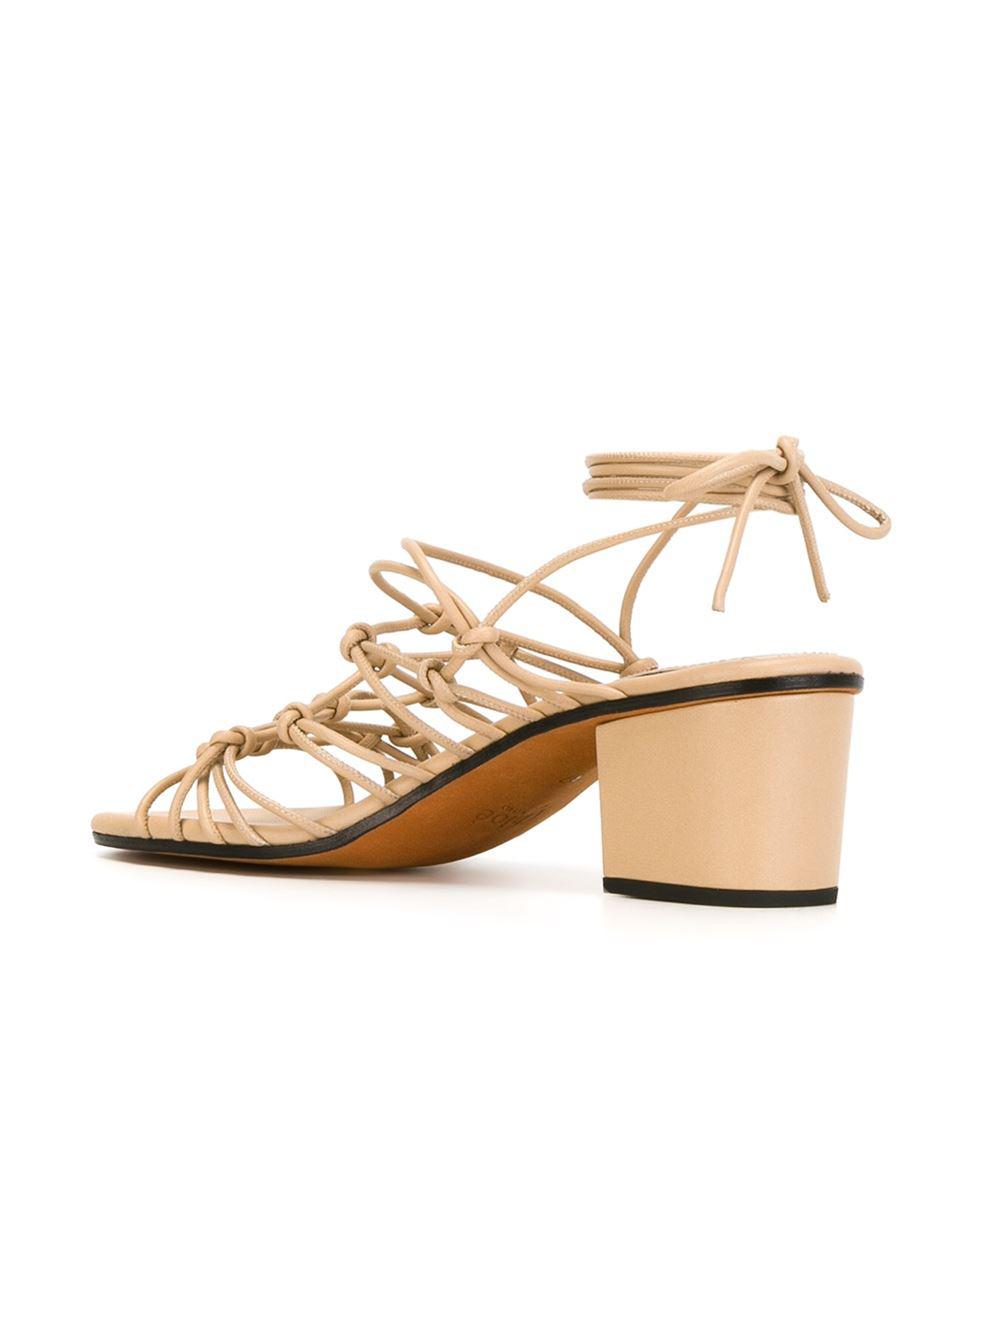 Chloé Leather Chloé Jamie Strappy Sandals in Natural - Lyst